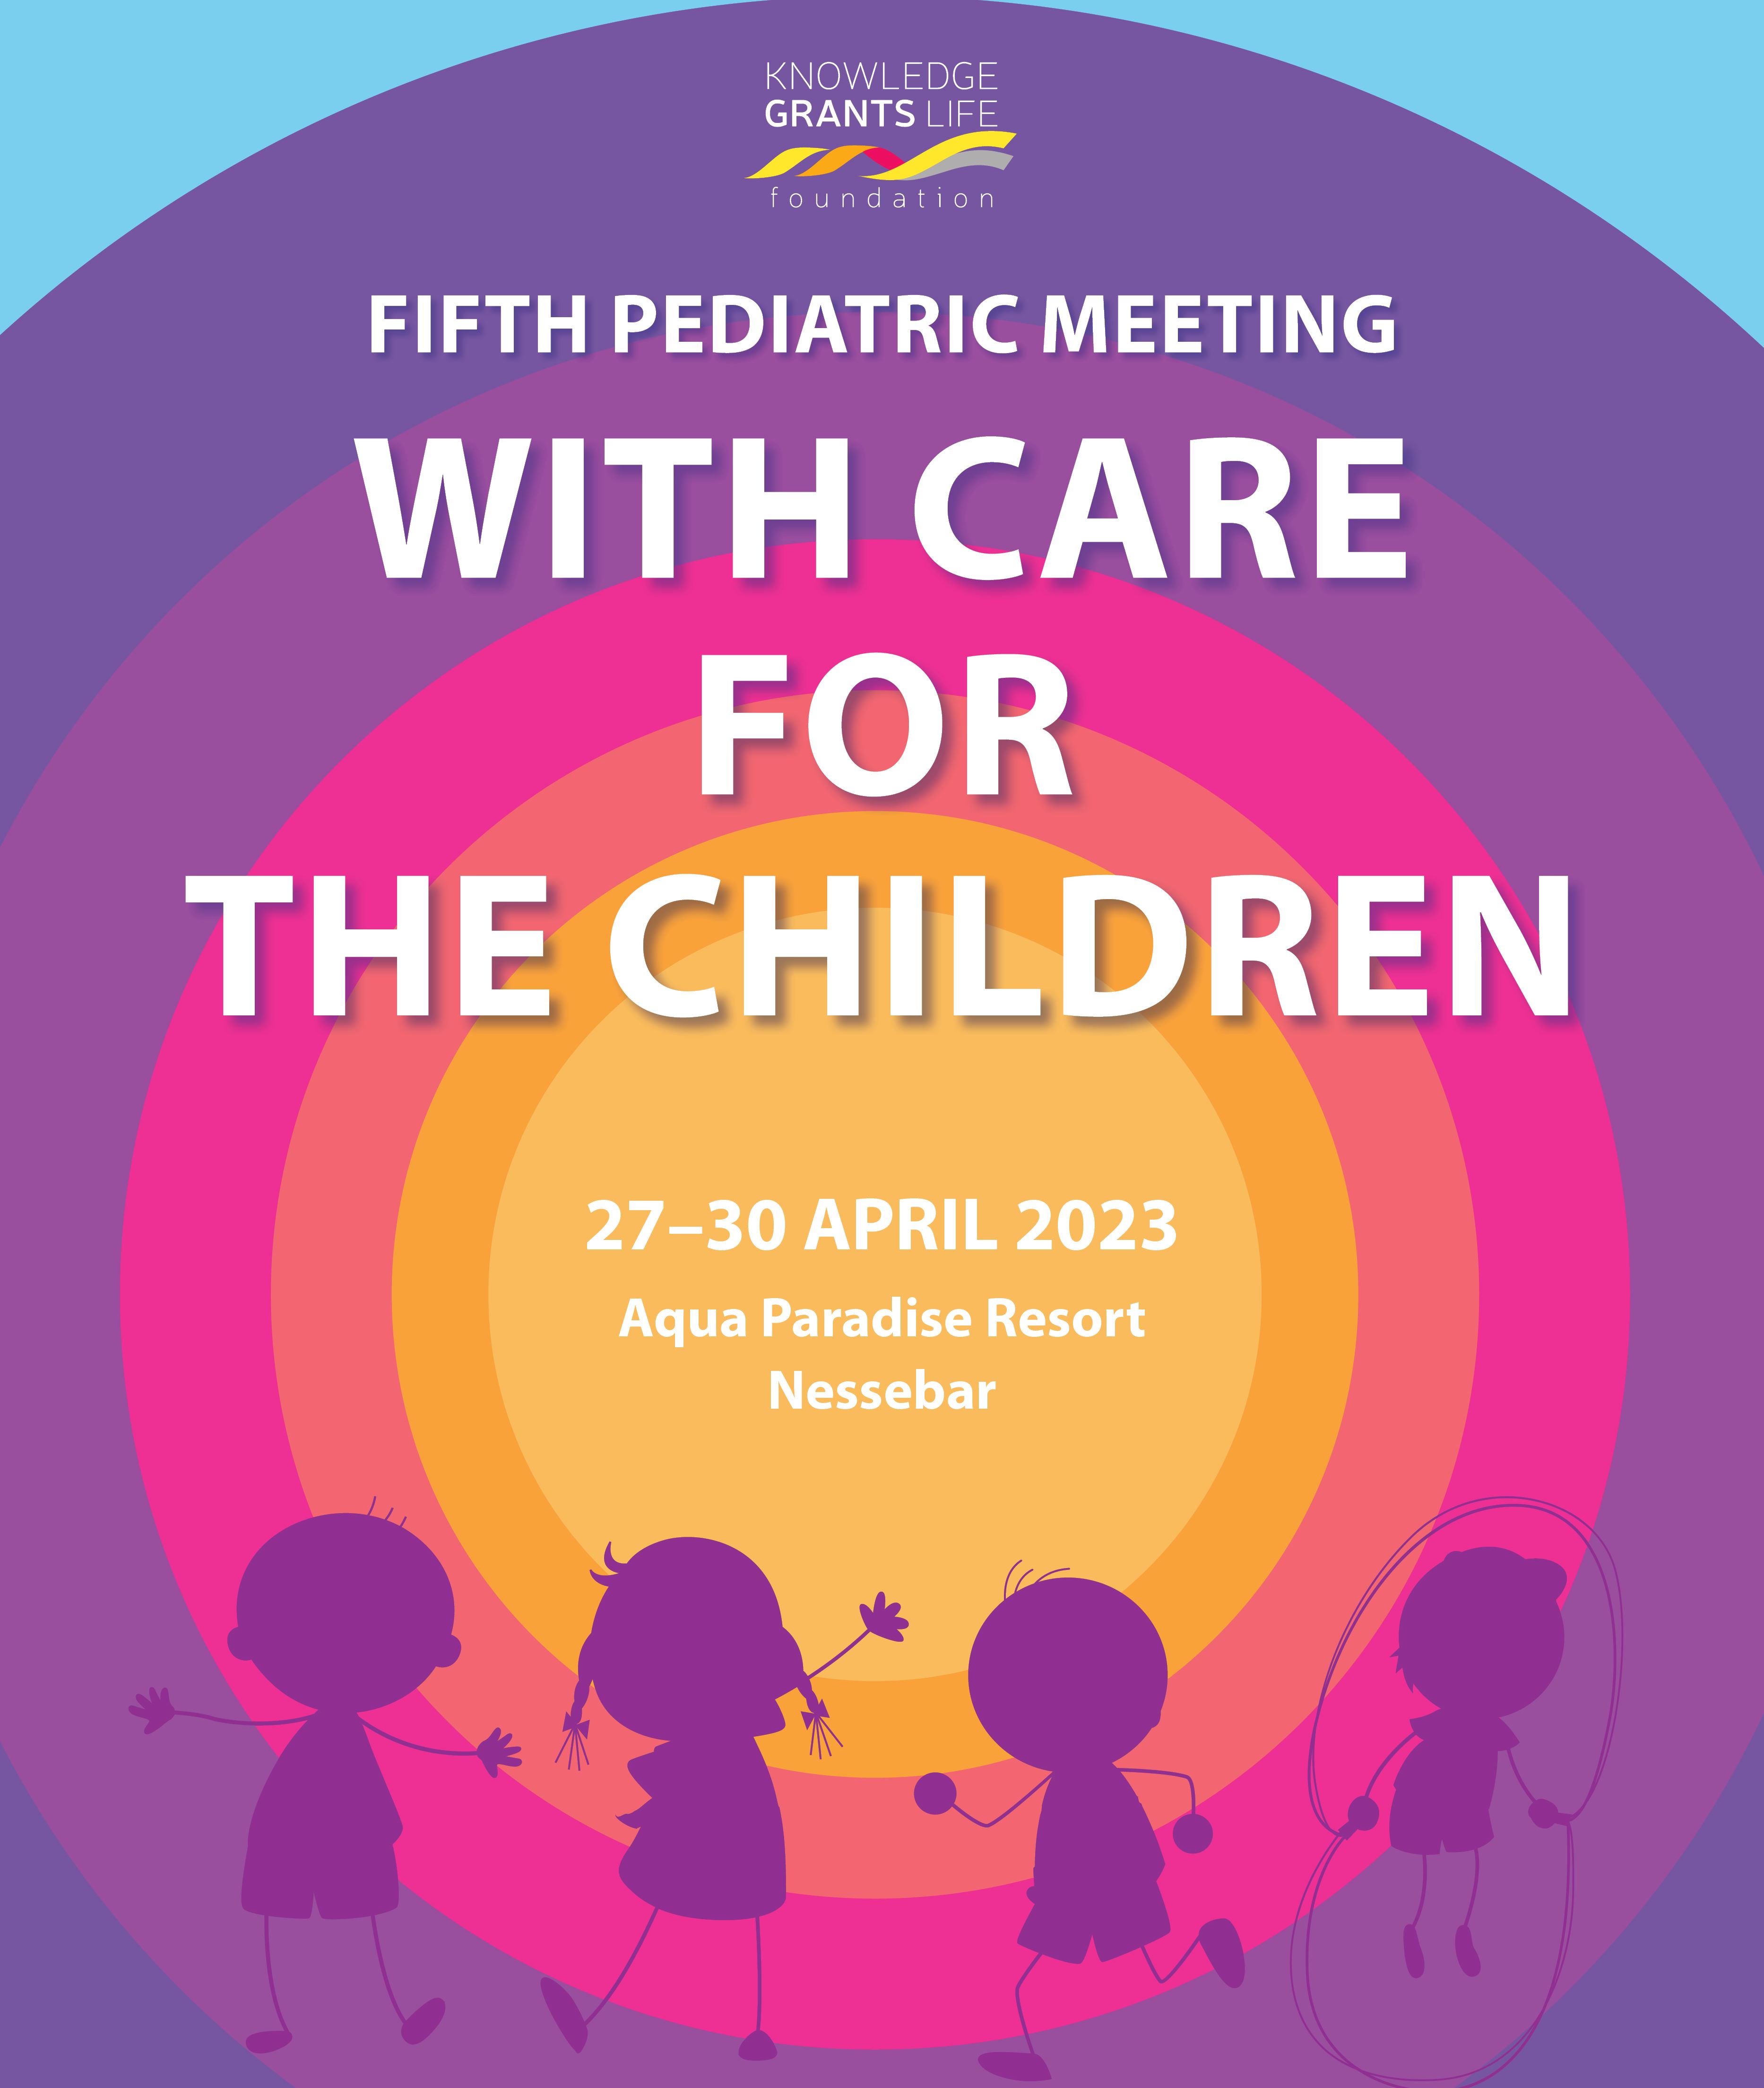 Fifth Pediatric Meeting “With Care for the Children”